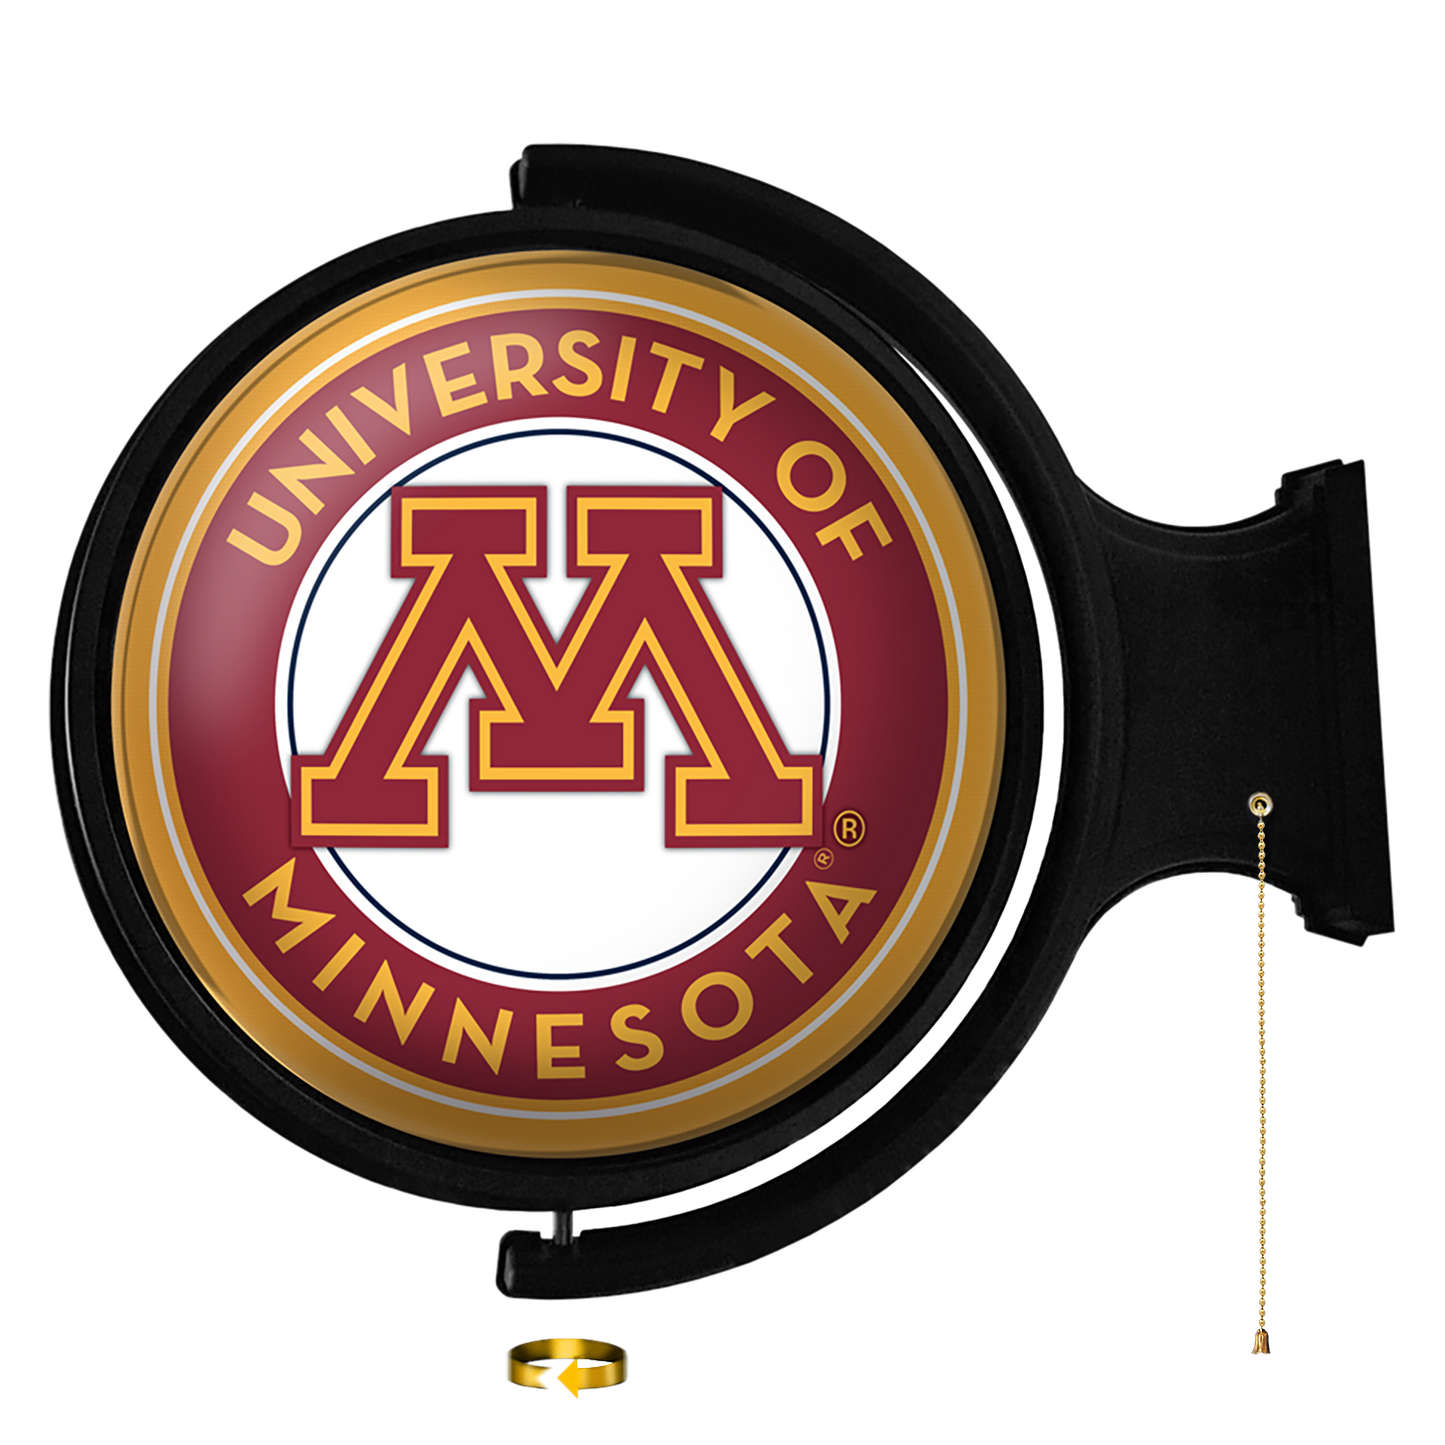 Minnesota Golden Gophers Round Rotating Wall Sign